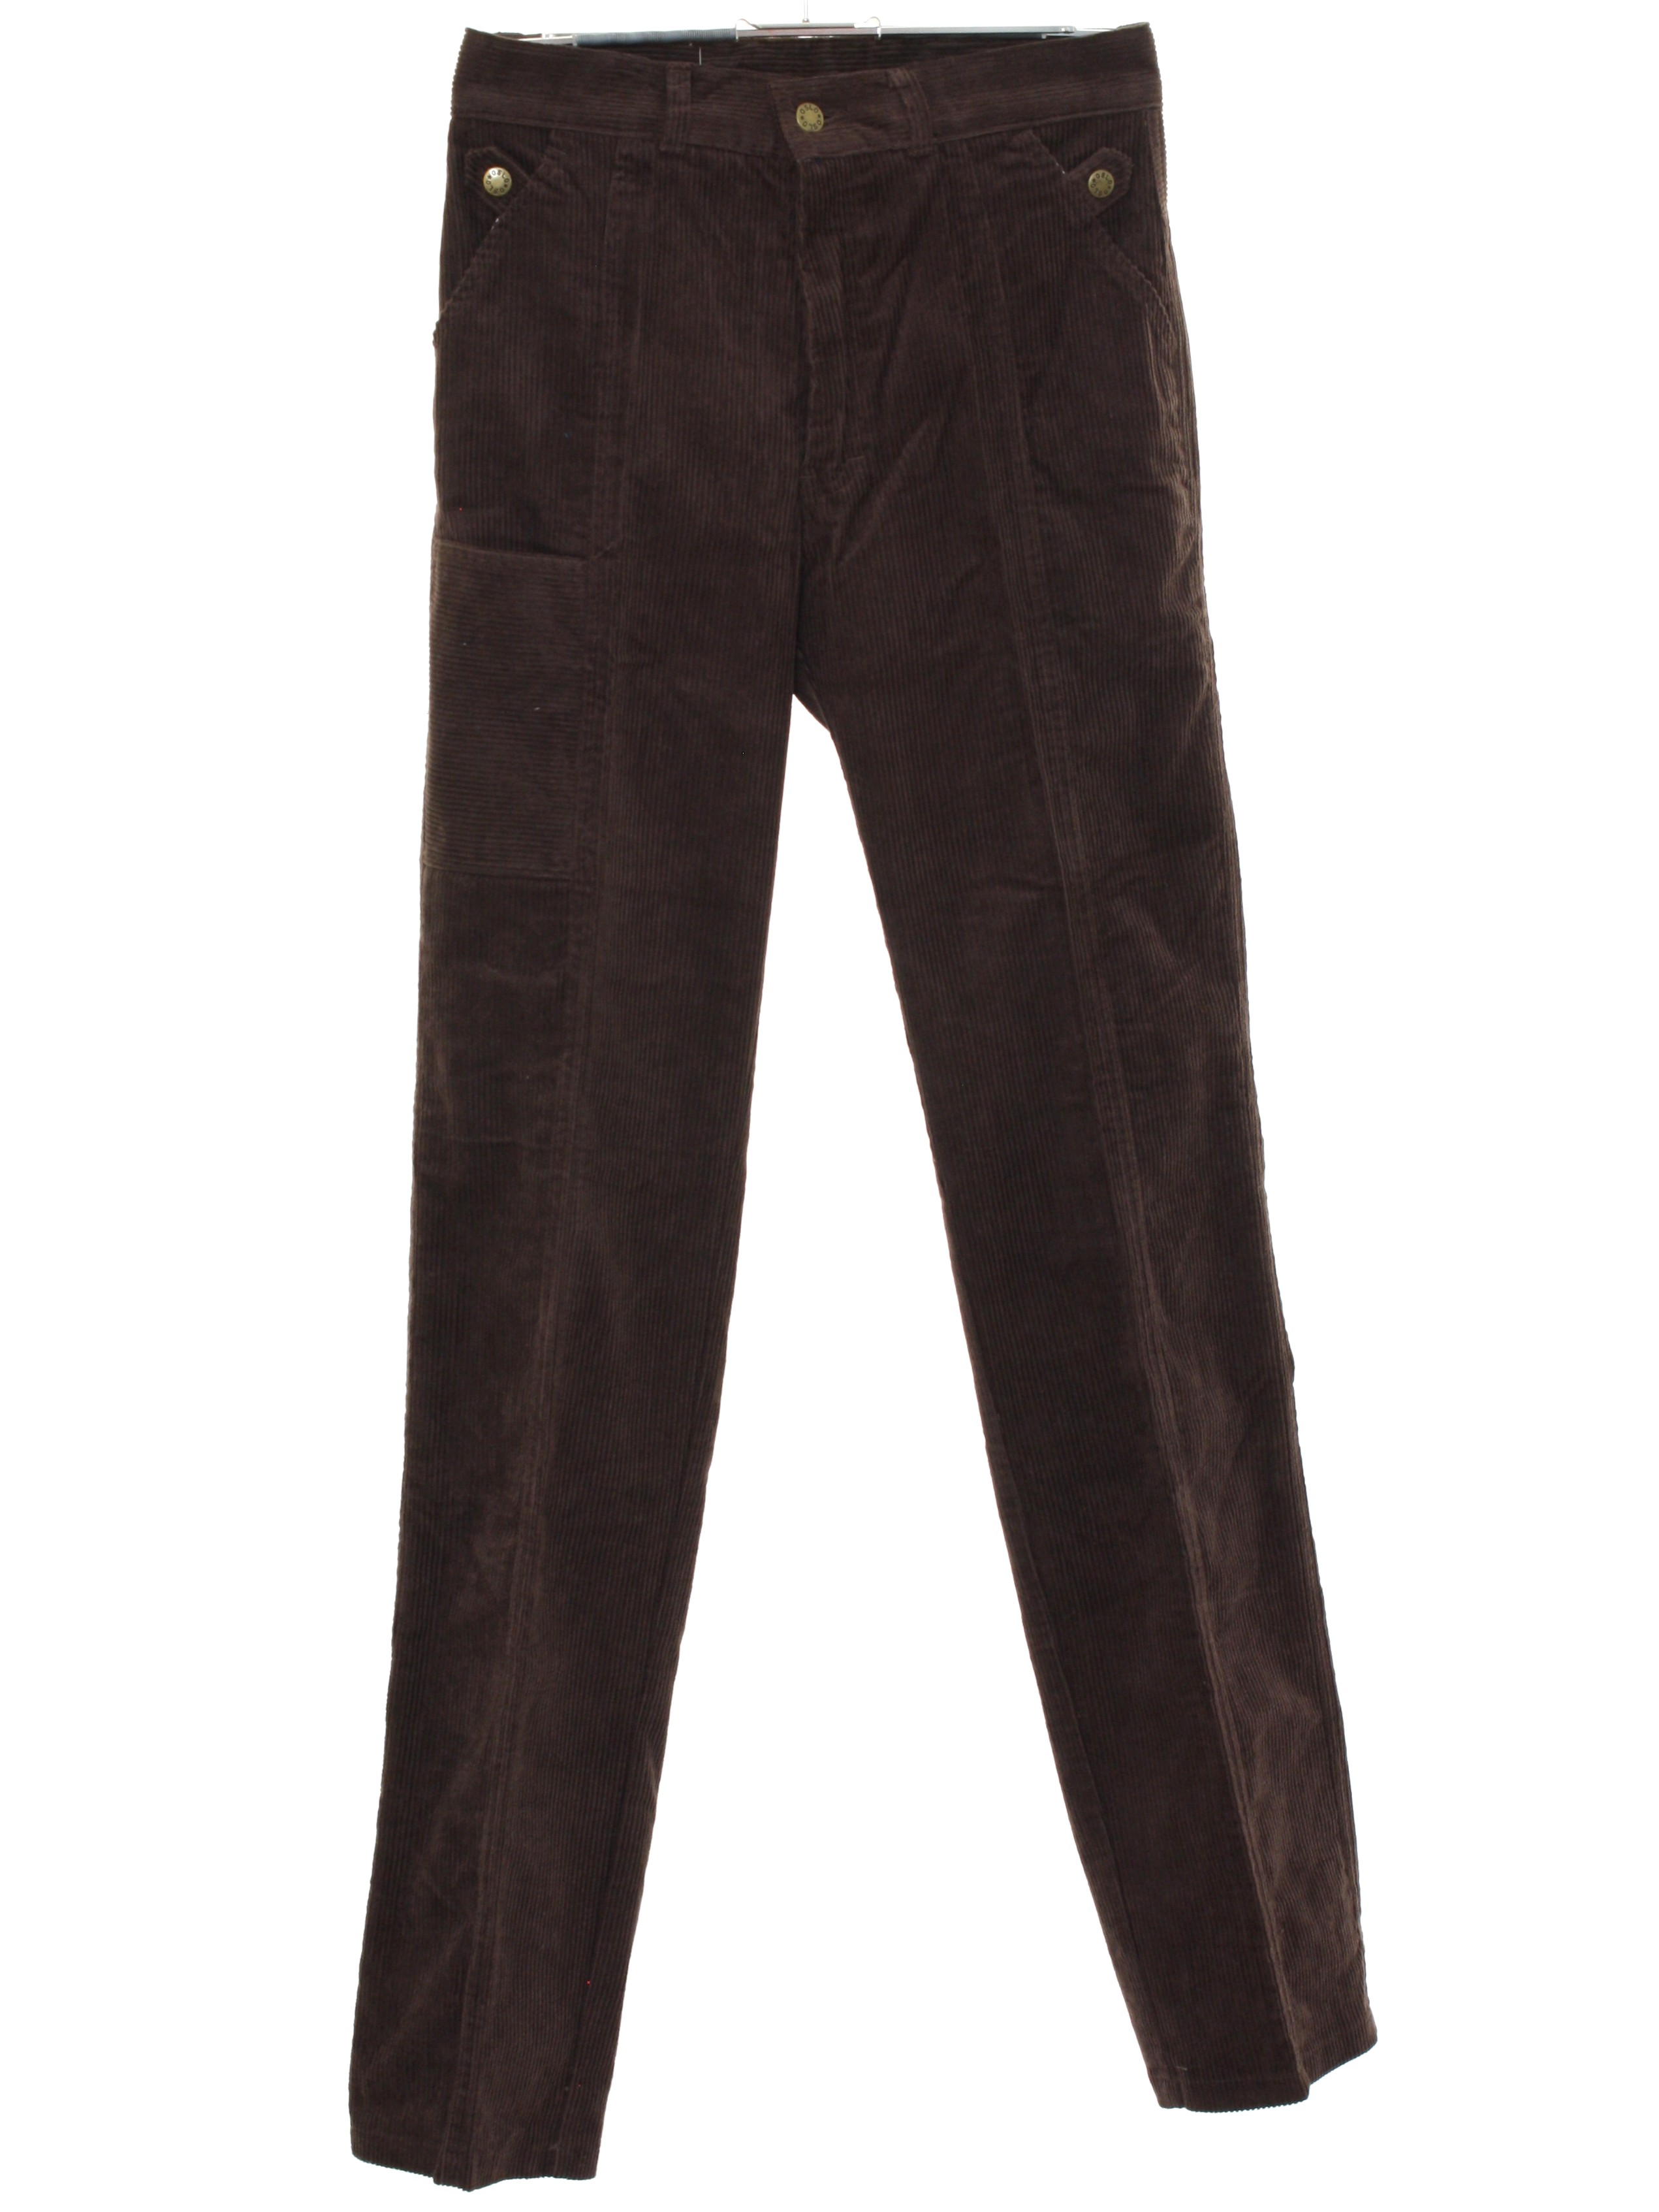 1980's Retro Pants: 80s -Oslo- Mens brown background wide wale cotton ...